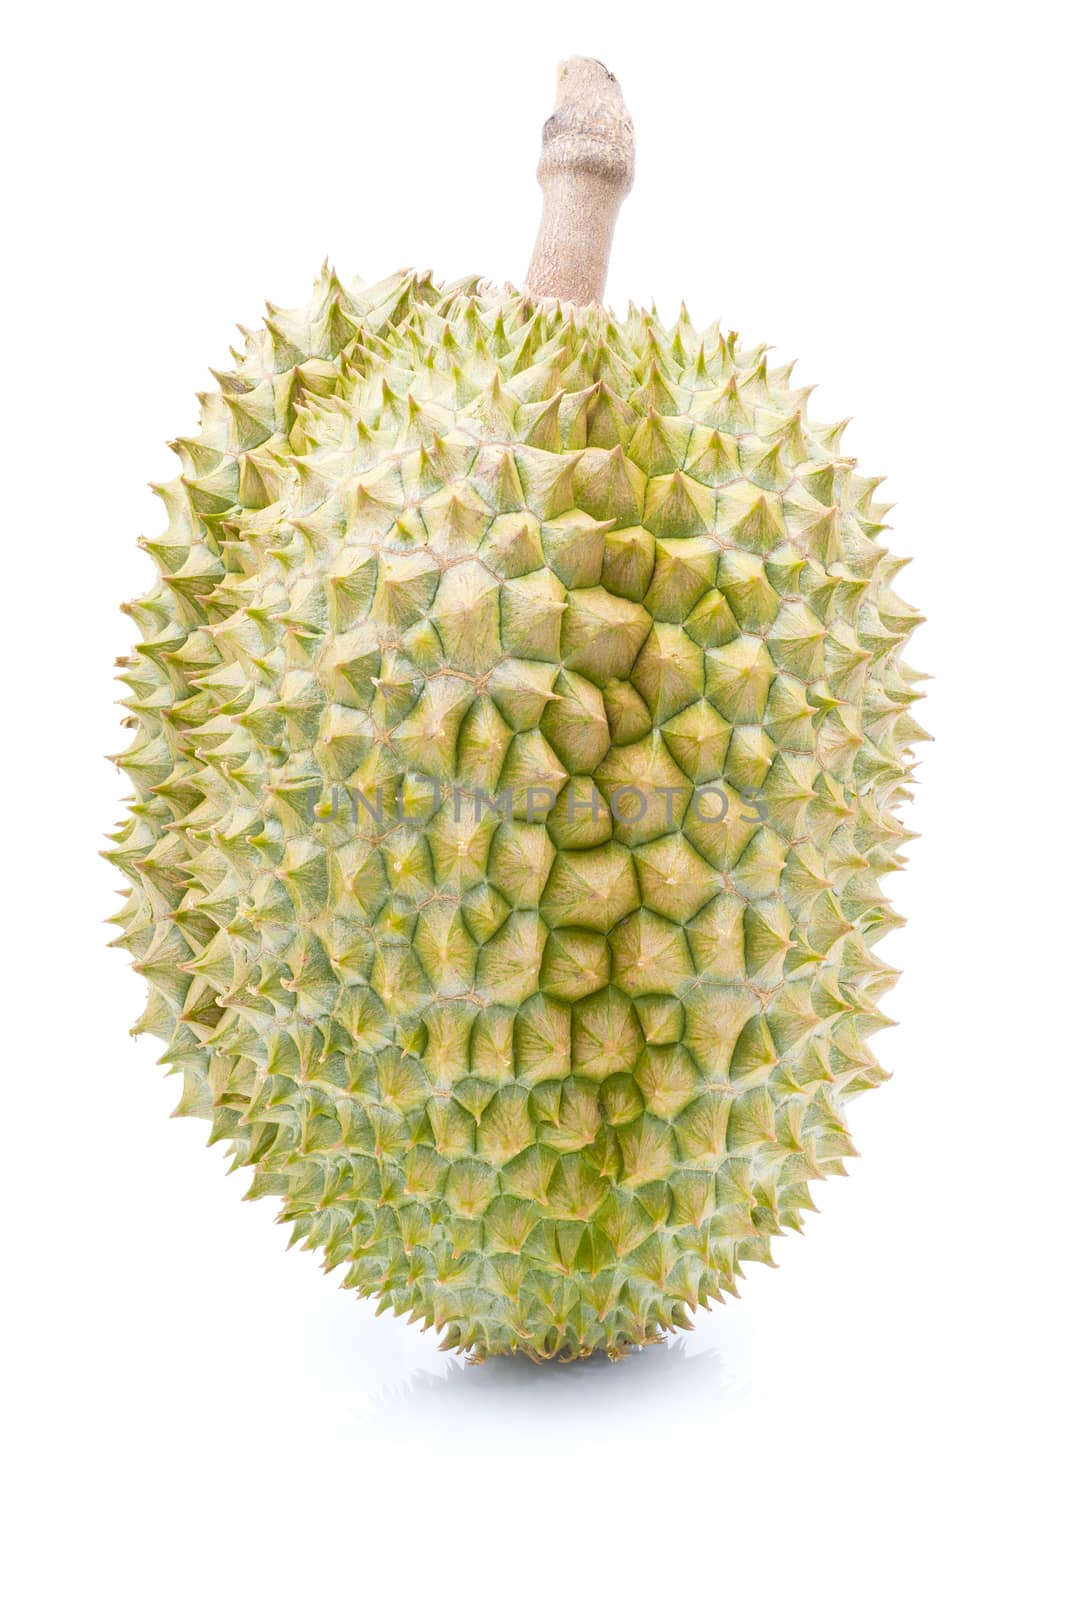 Durian fruit on a white background by sompongtom